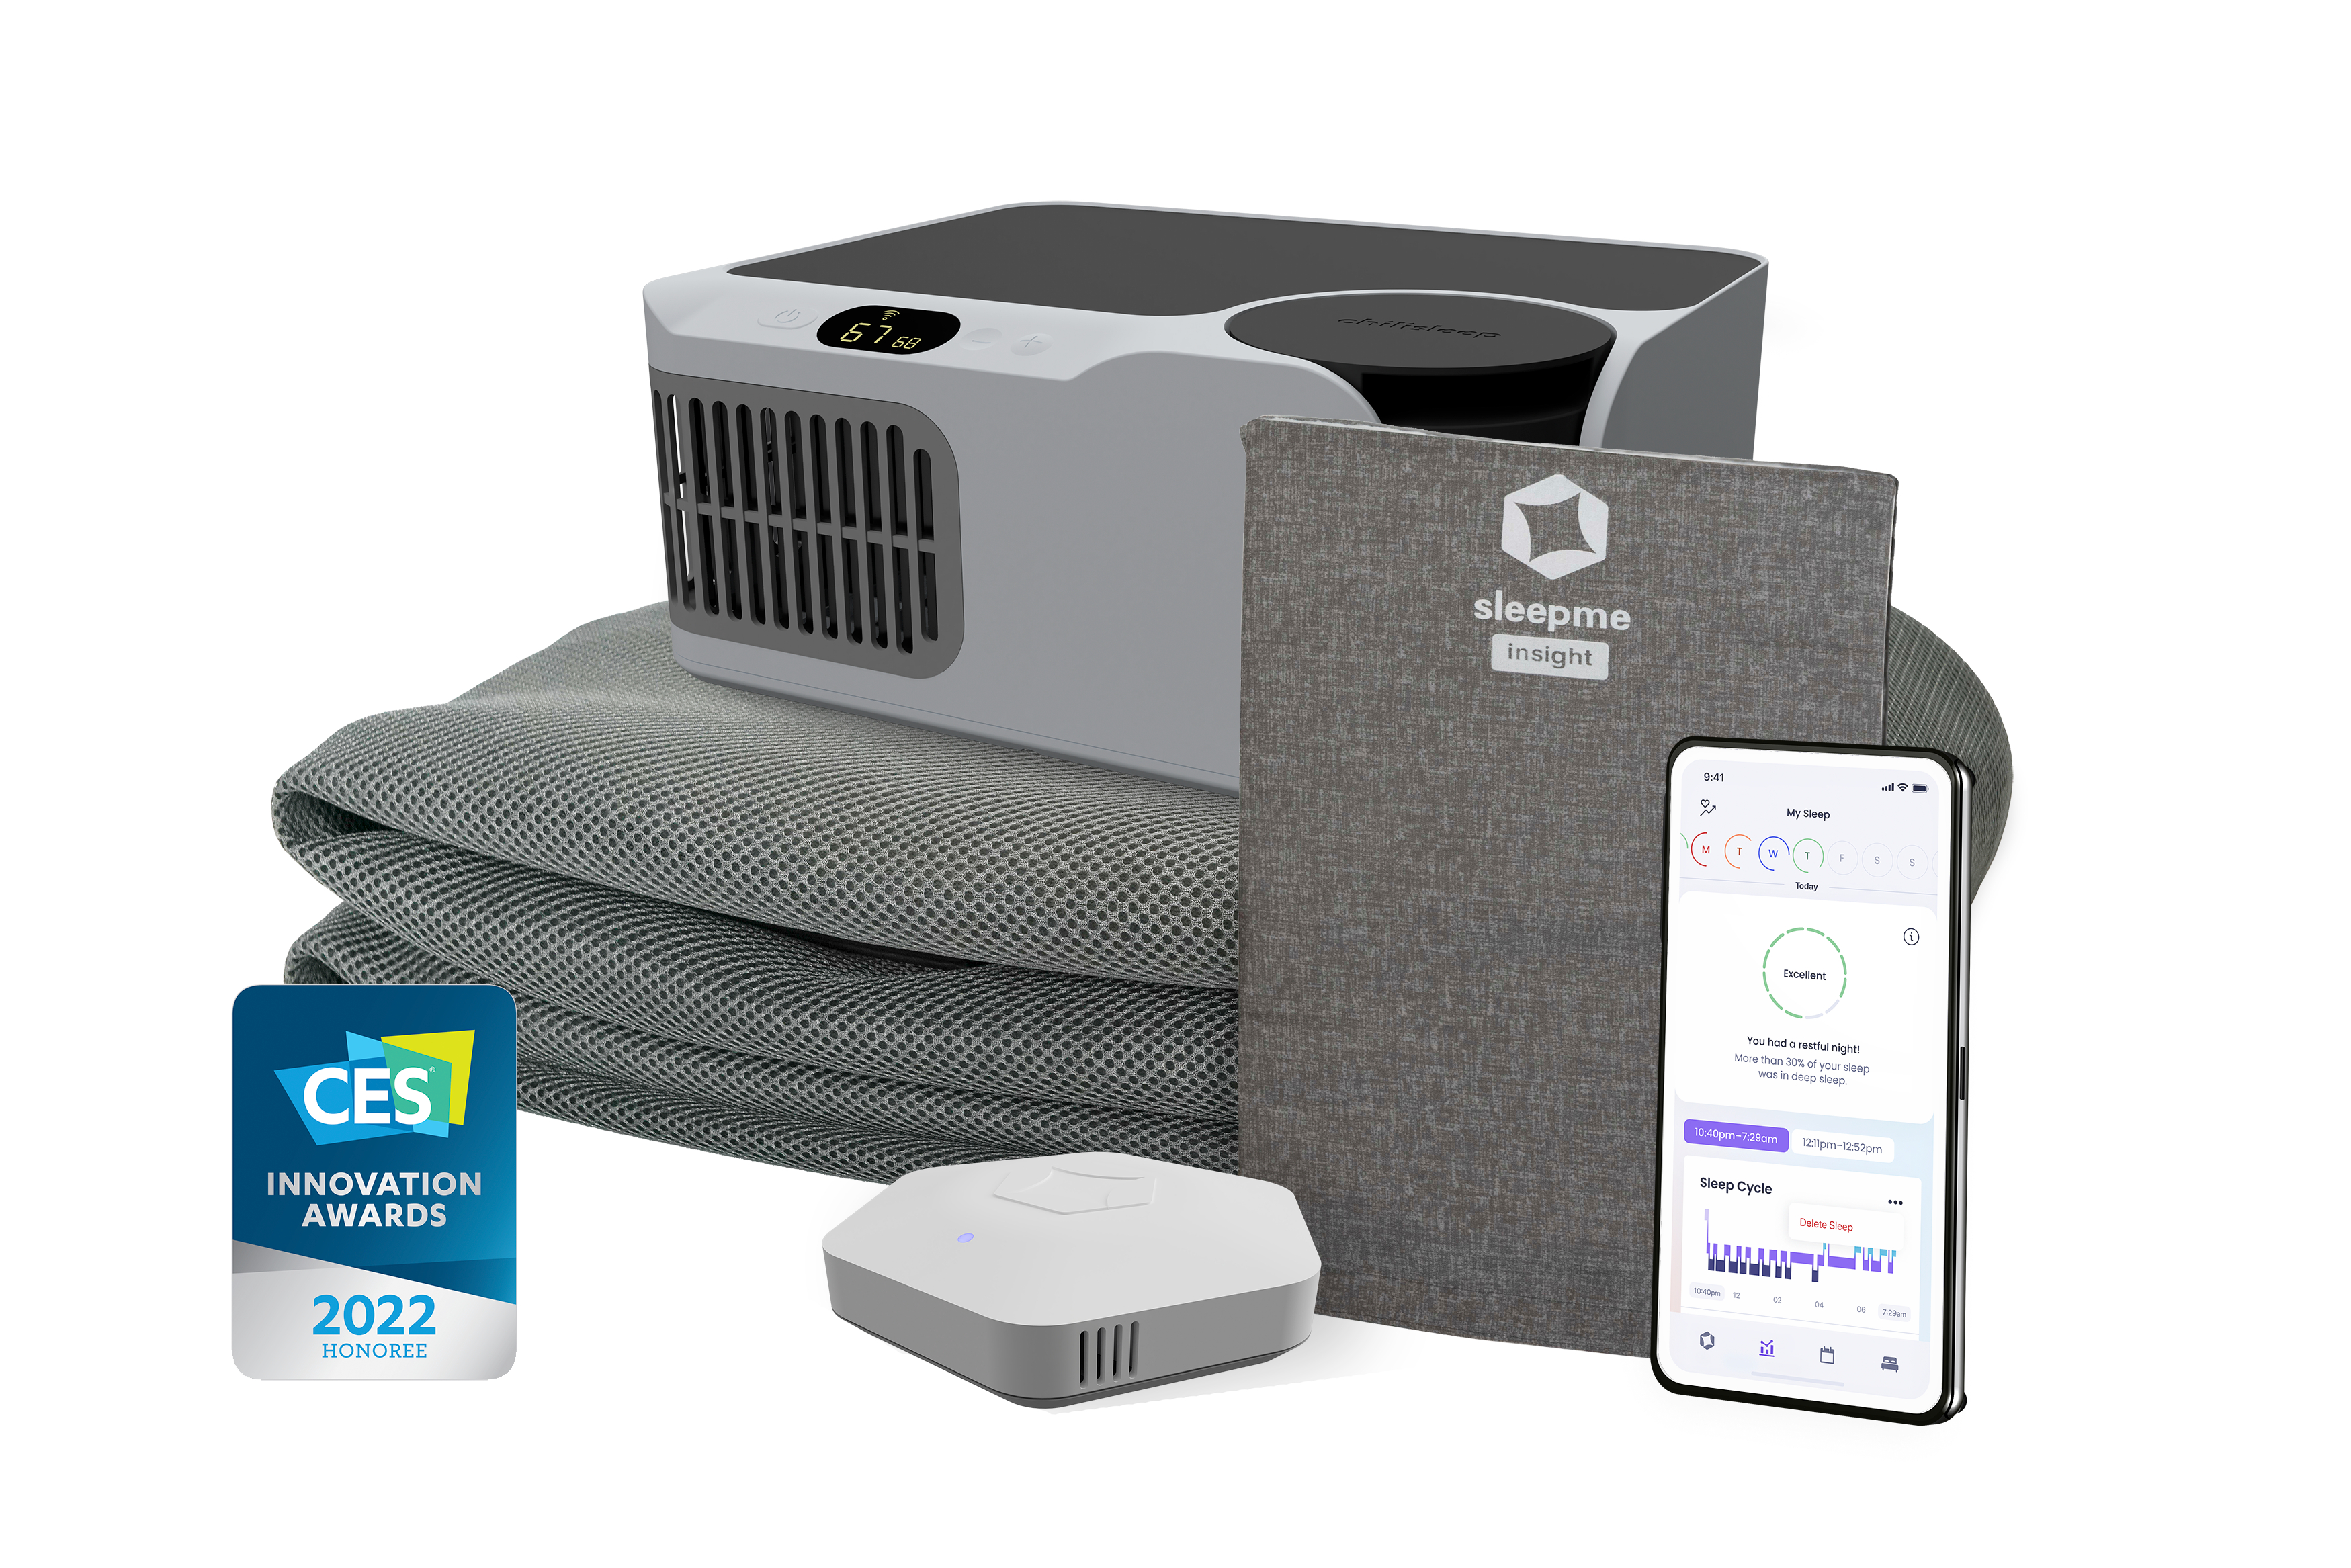 Chilipad Cube Sleep System Review 2021 - The Strategist"><span itemprop=